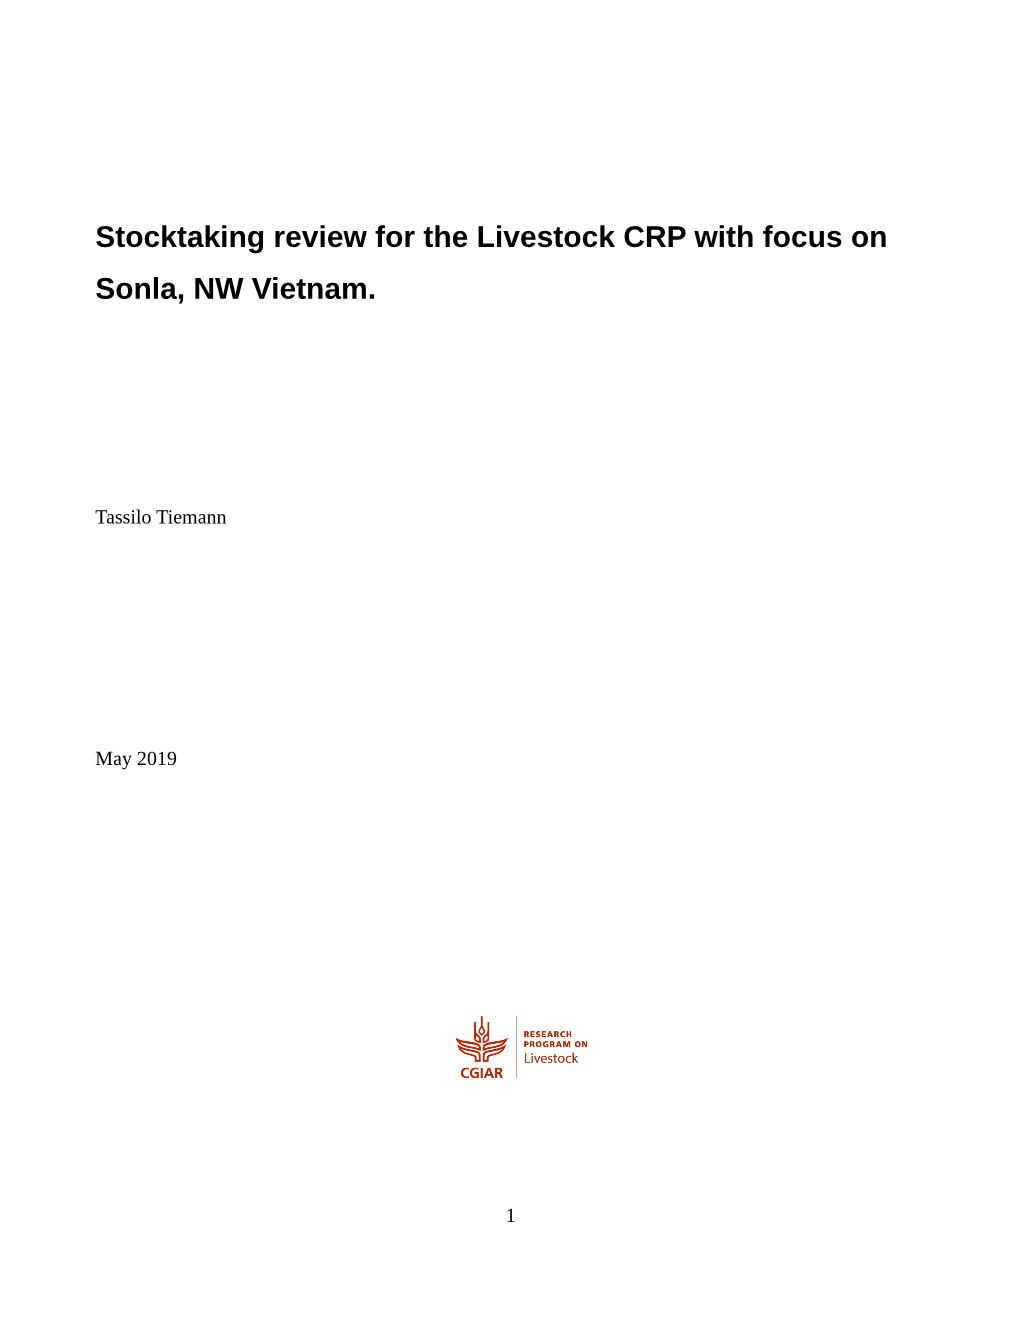 Stocktaking Review for the Livestock CRP with Focus on Sonla, NW Vietnam